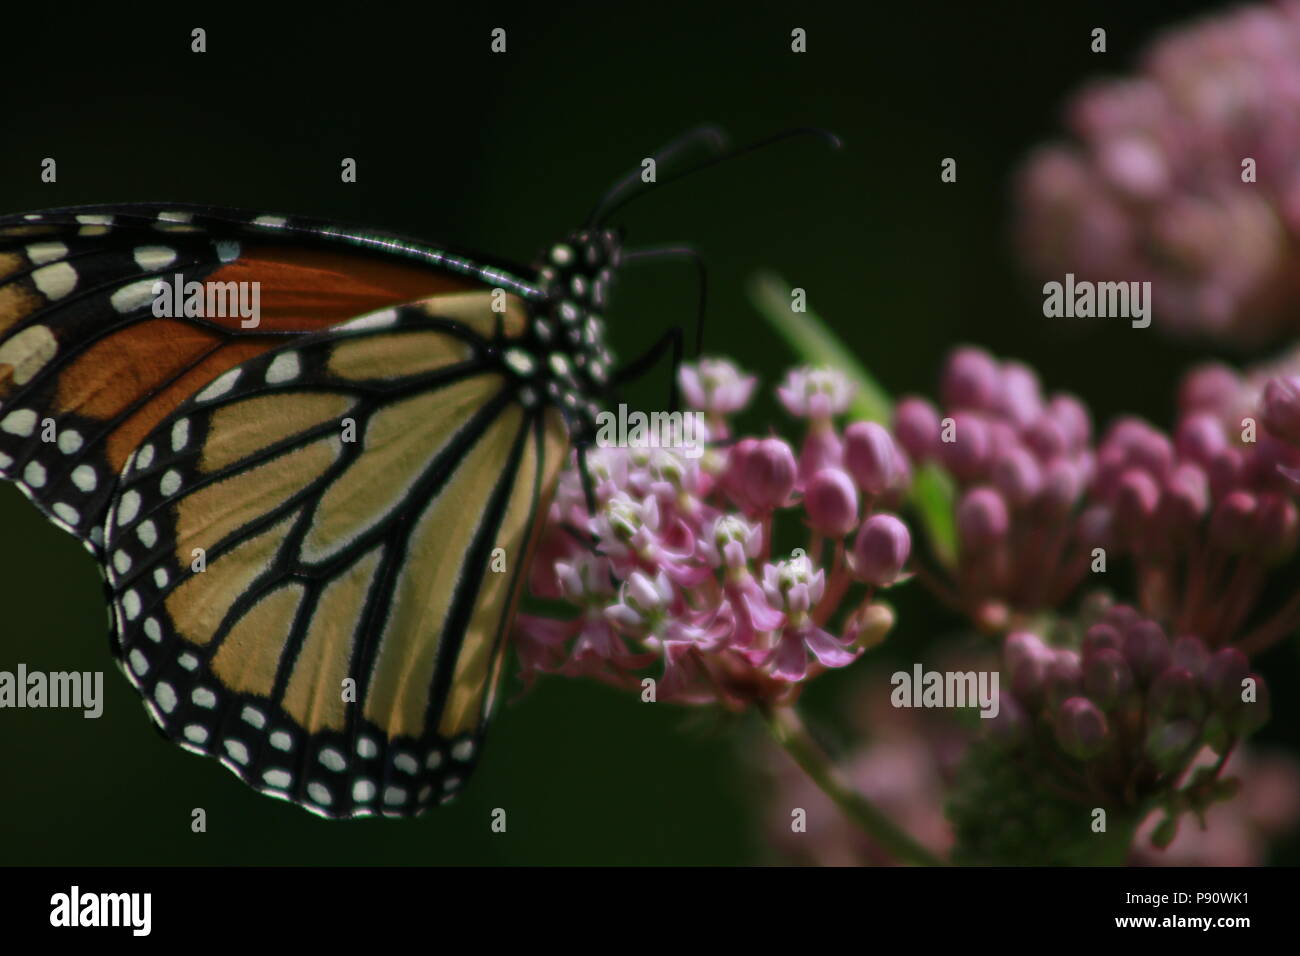 Monarch butterfly feeding on milkweed in gRAND BEND ONTARIO. Stock Photo